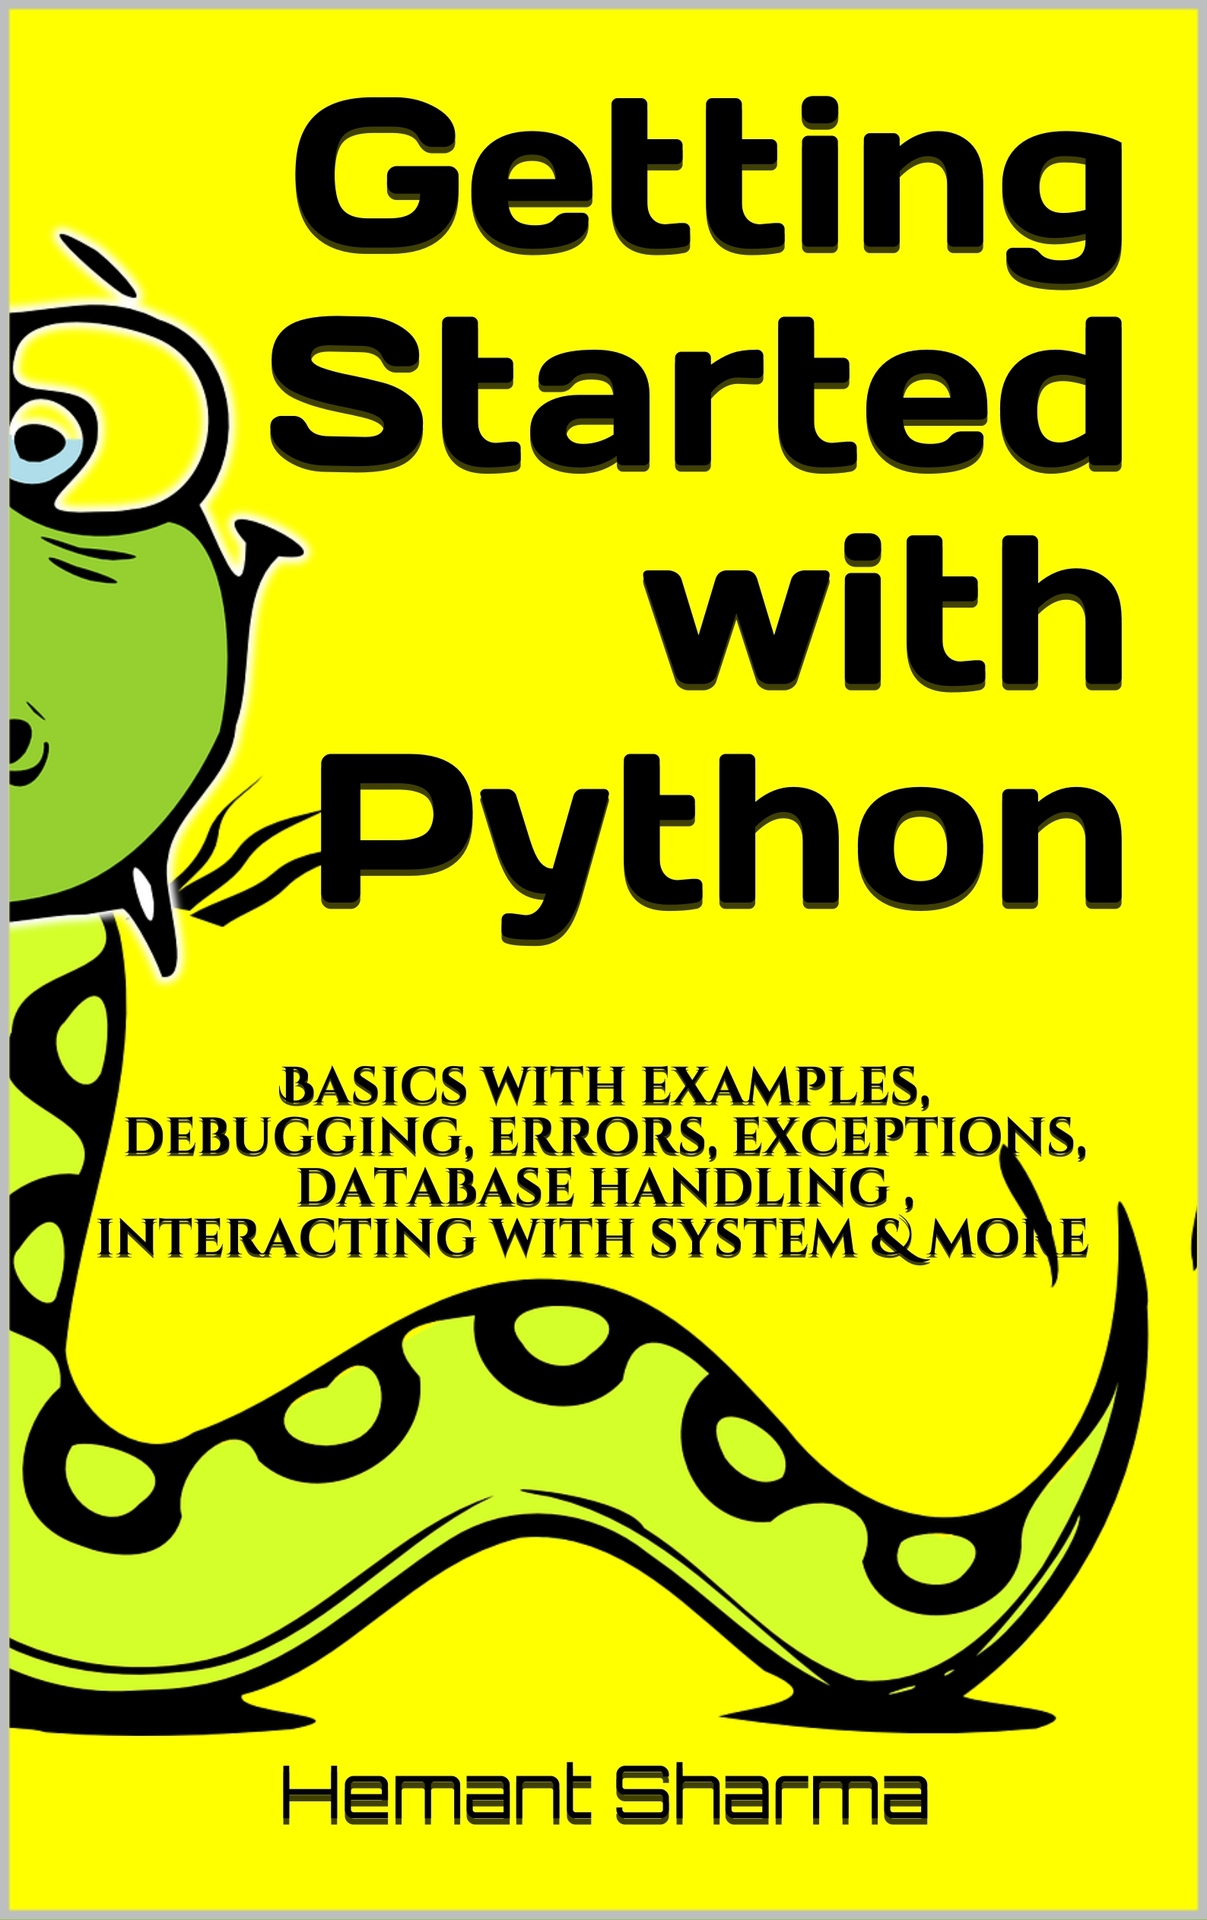 Getting Started with Python: Basics with examples, debugging, errors, exceptions, database handling , interacting with system & more